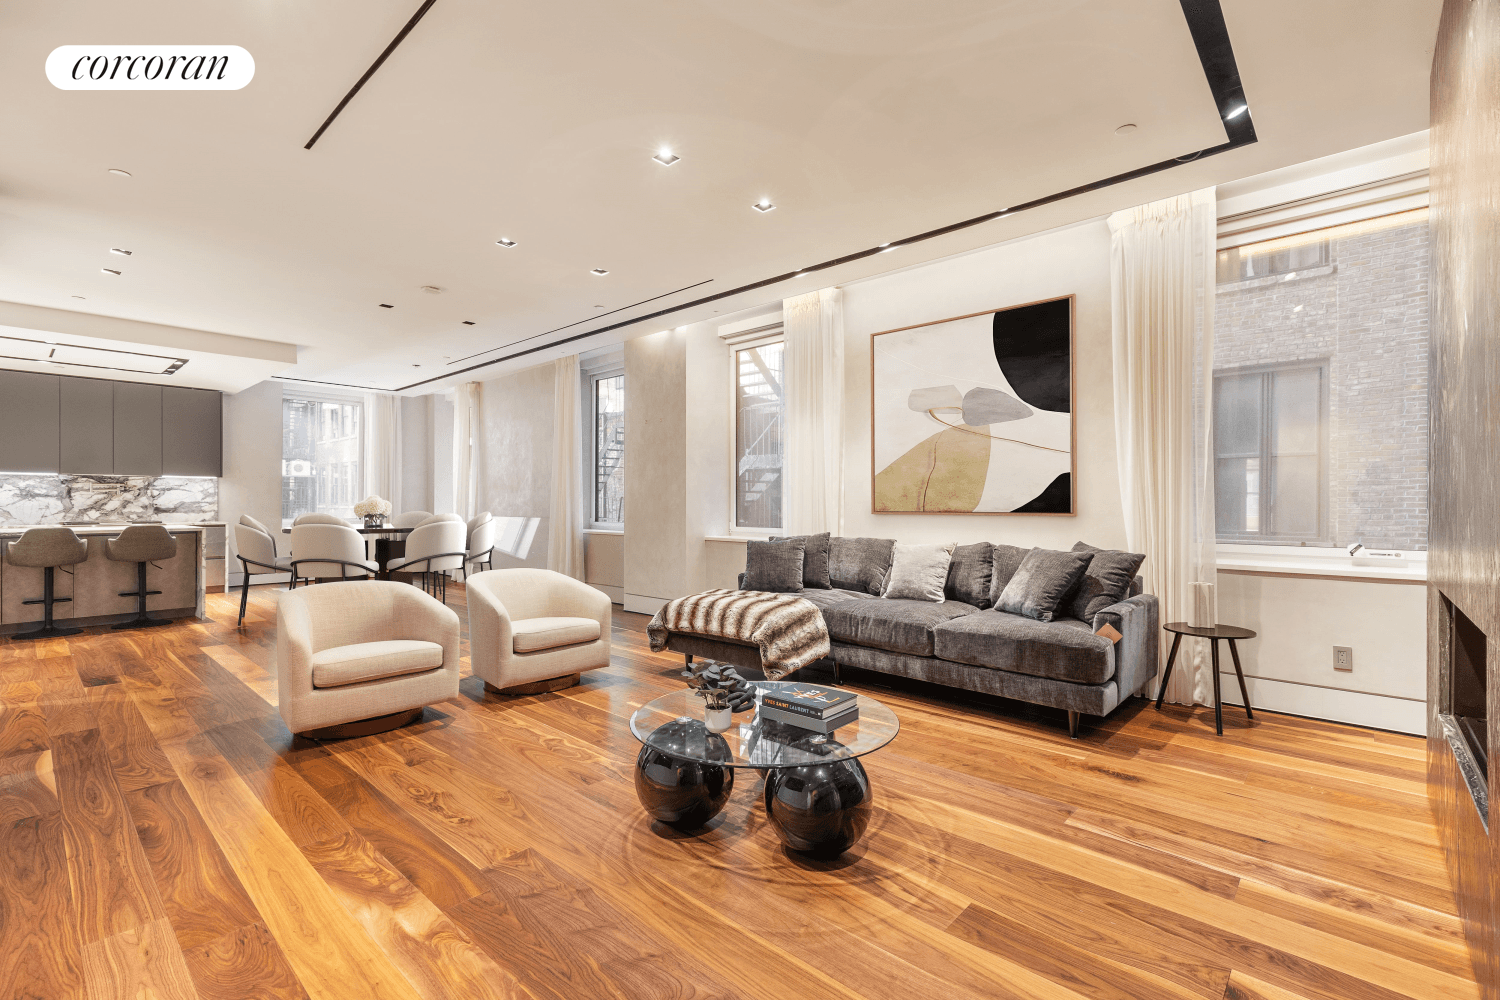 Modern upgrades meet pre war elements in this authentic Chelsea loft that epitomizes downtown living.